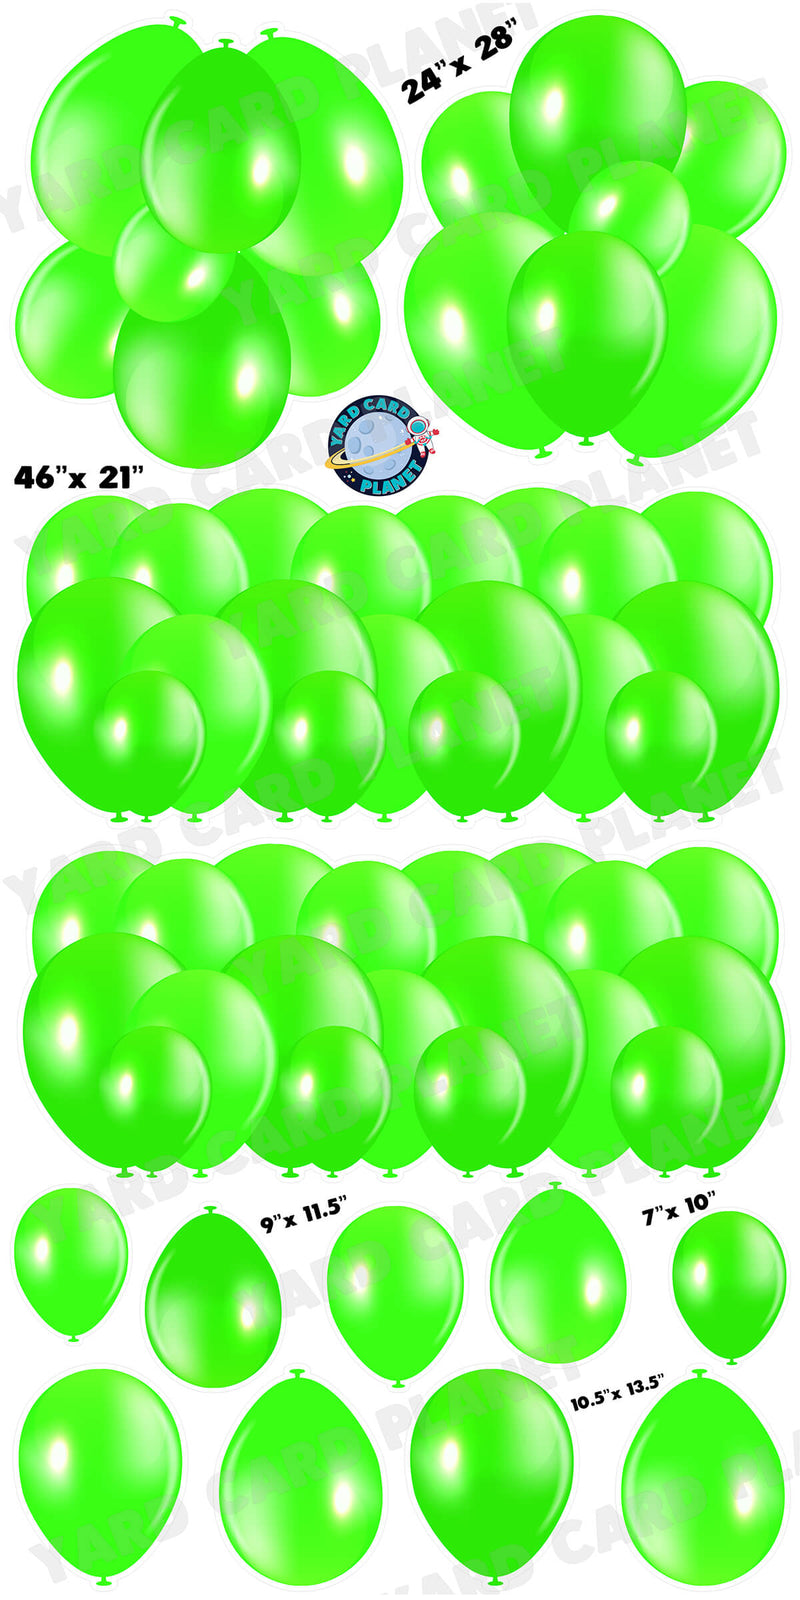 Neon Green Balloon Panels, Bouquets and Singles Yard Card Set